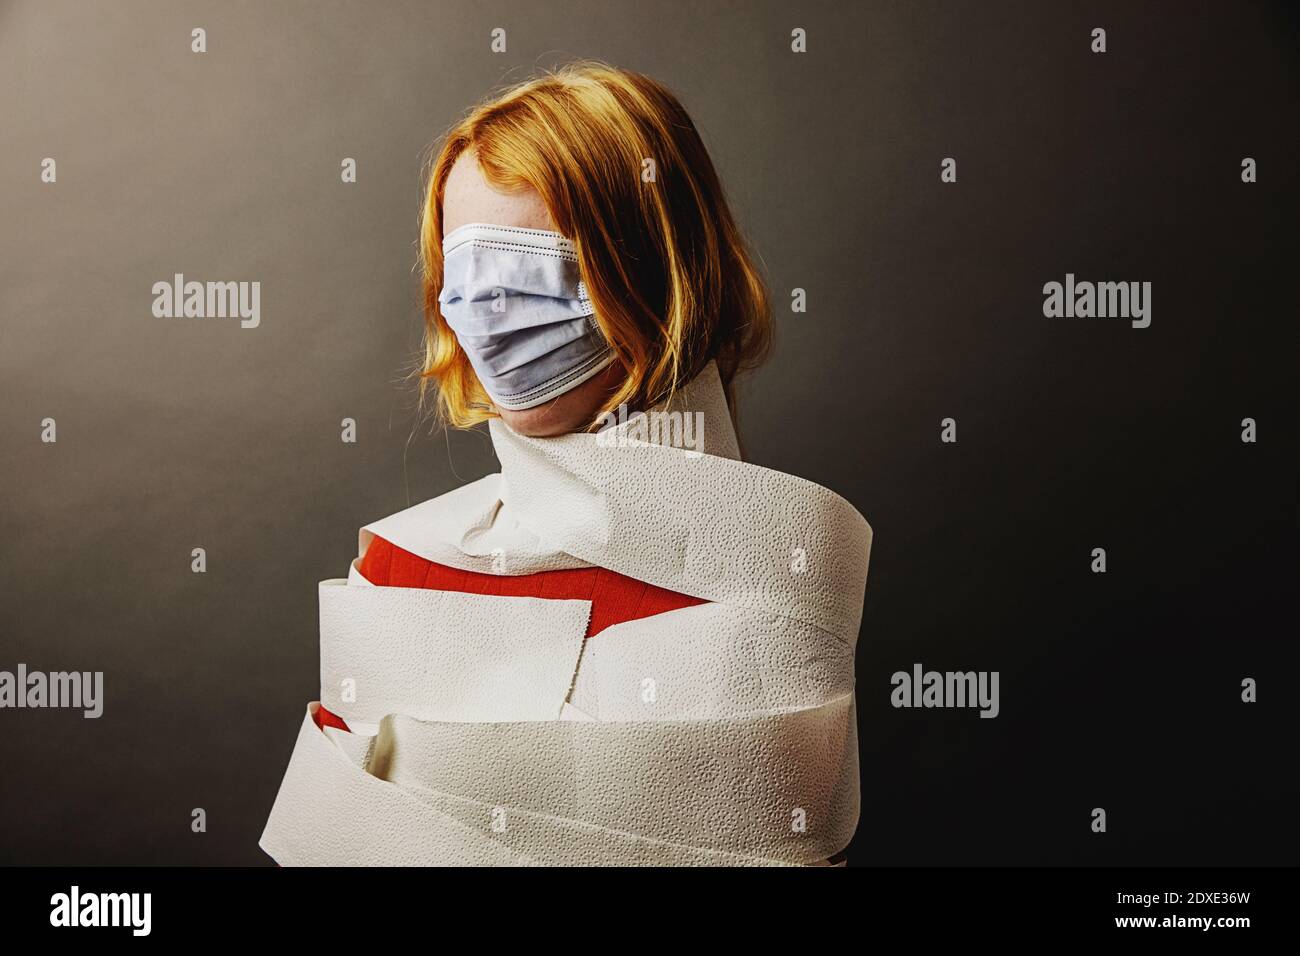 Teenage girl wrapped in toilet paper and face covered with protective face mask standing against gray background Stock Photo